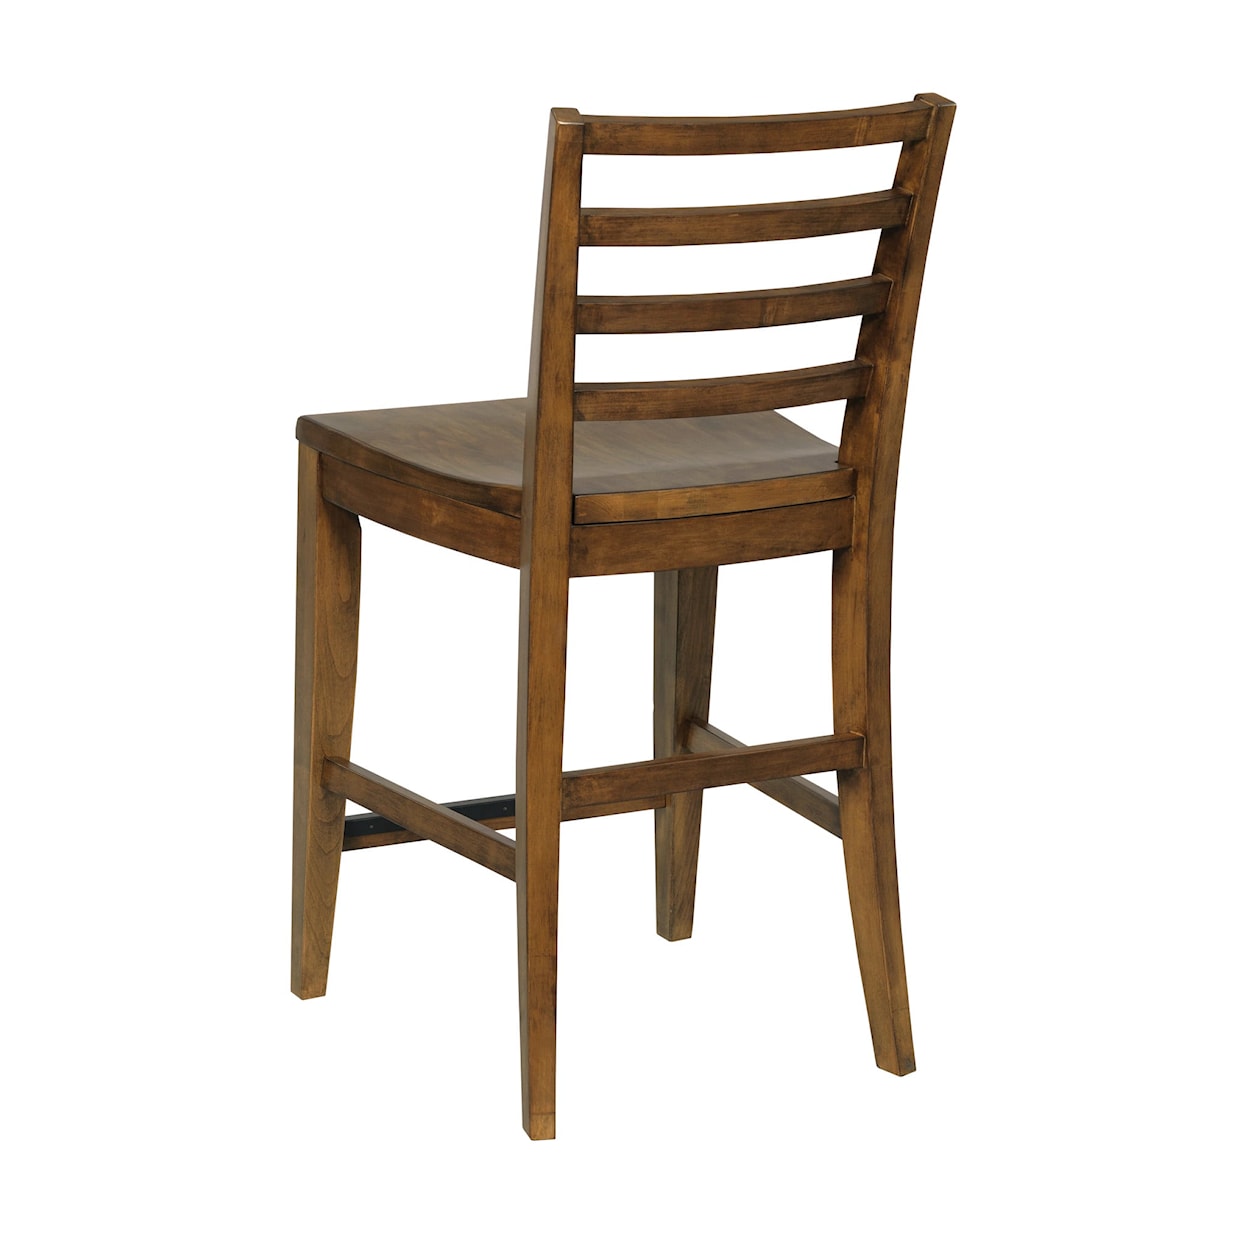 Kincaid Furniture Abode Frisco Counter Height Chair